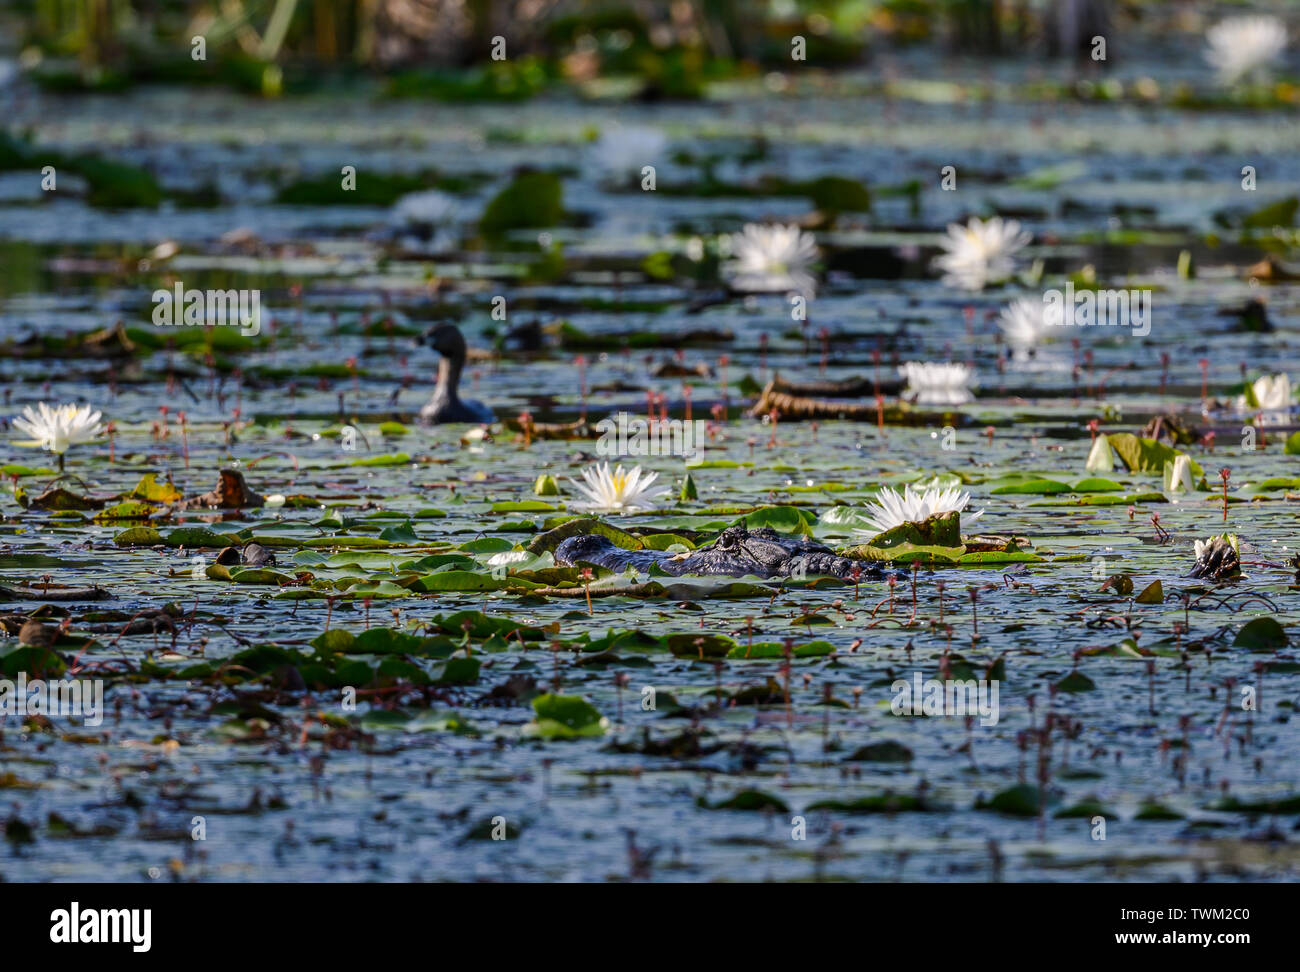 An alligator slowly approaching a Pied Grebe in a lily pond. Sheldon Lake State Park. Houston, Texas, USA. Stock Photo